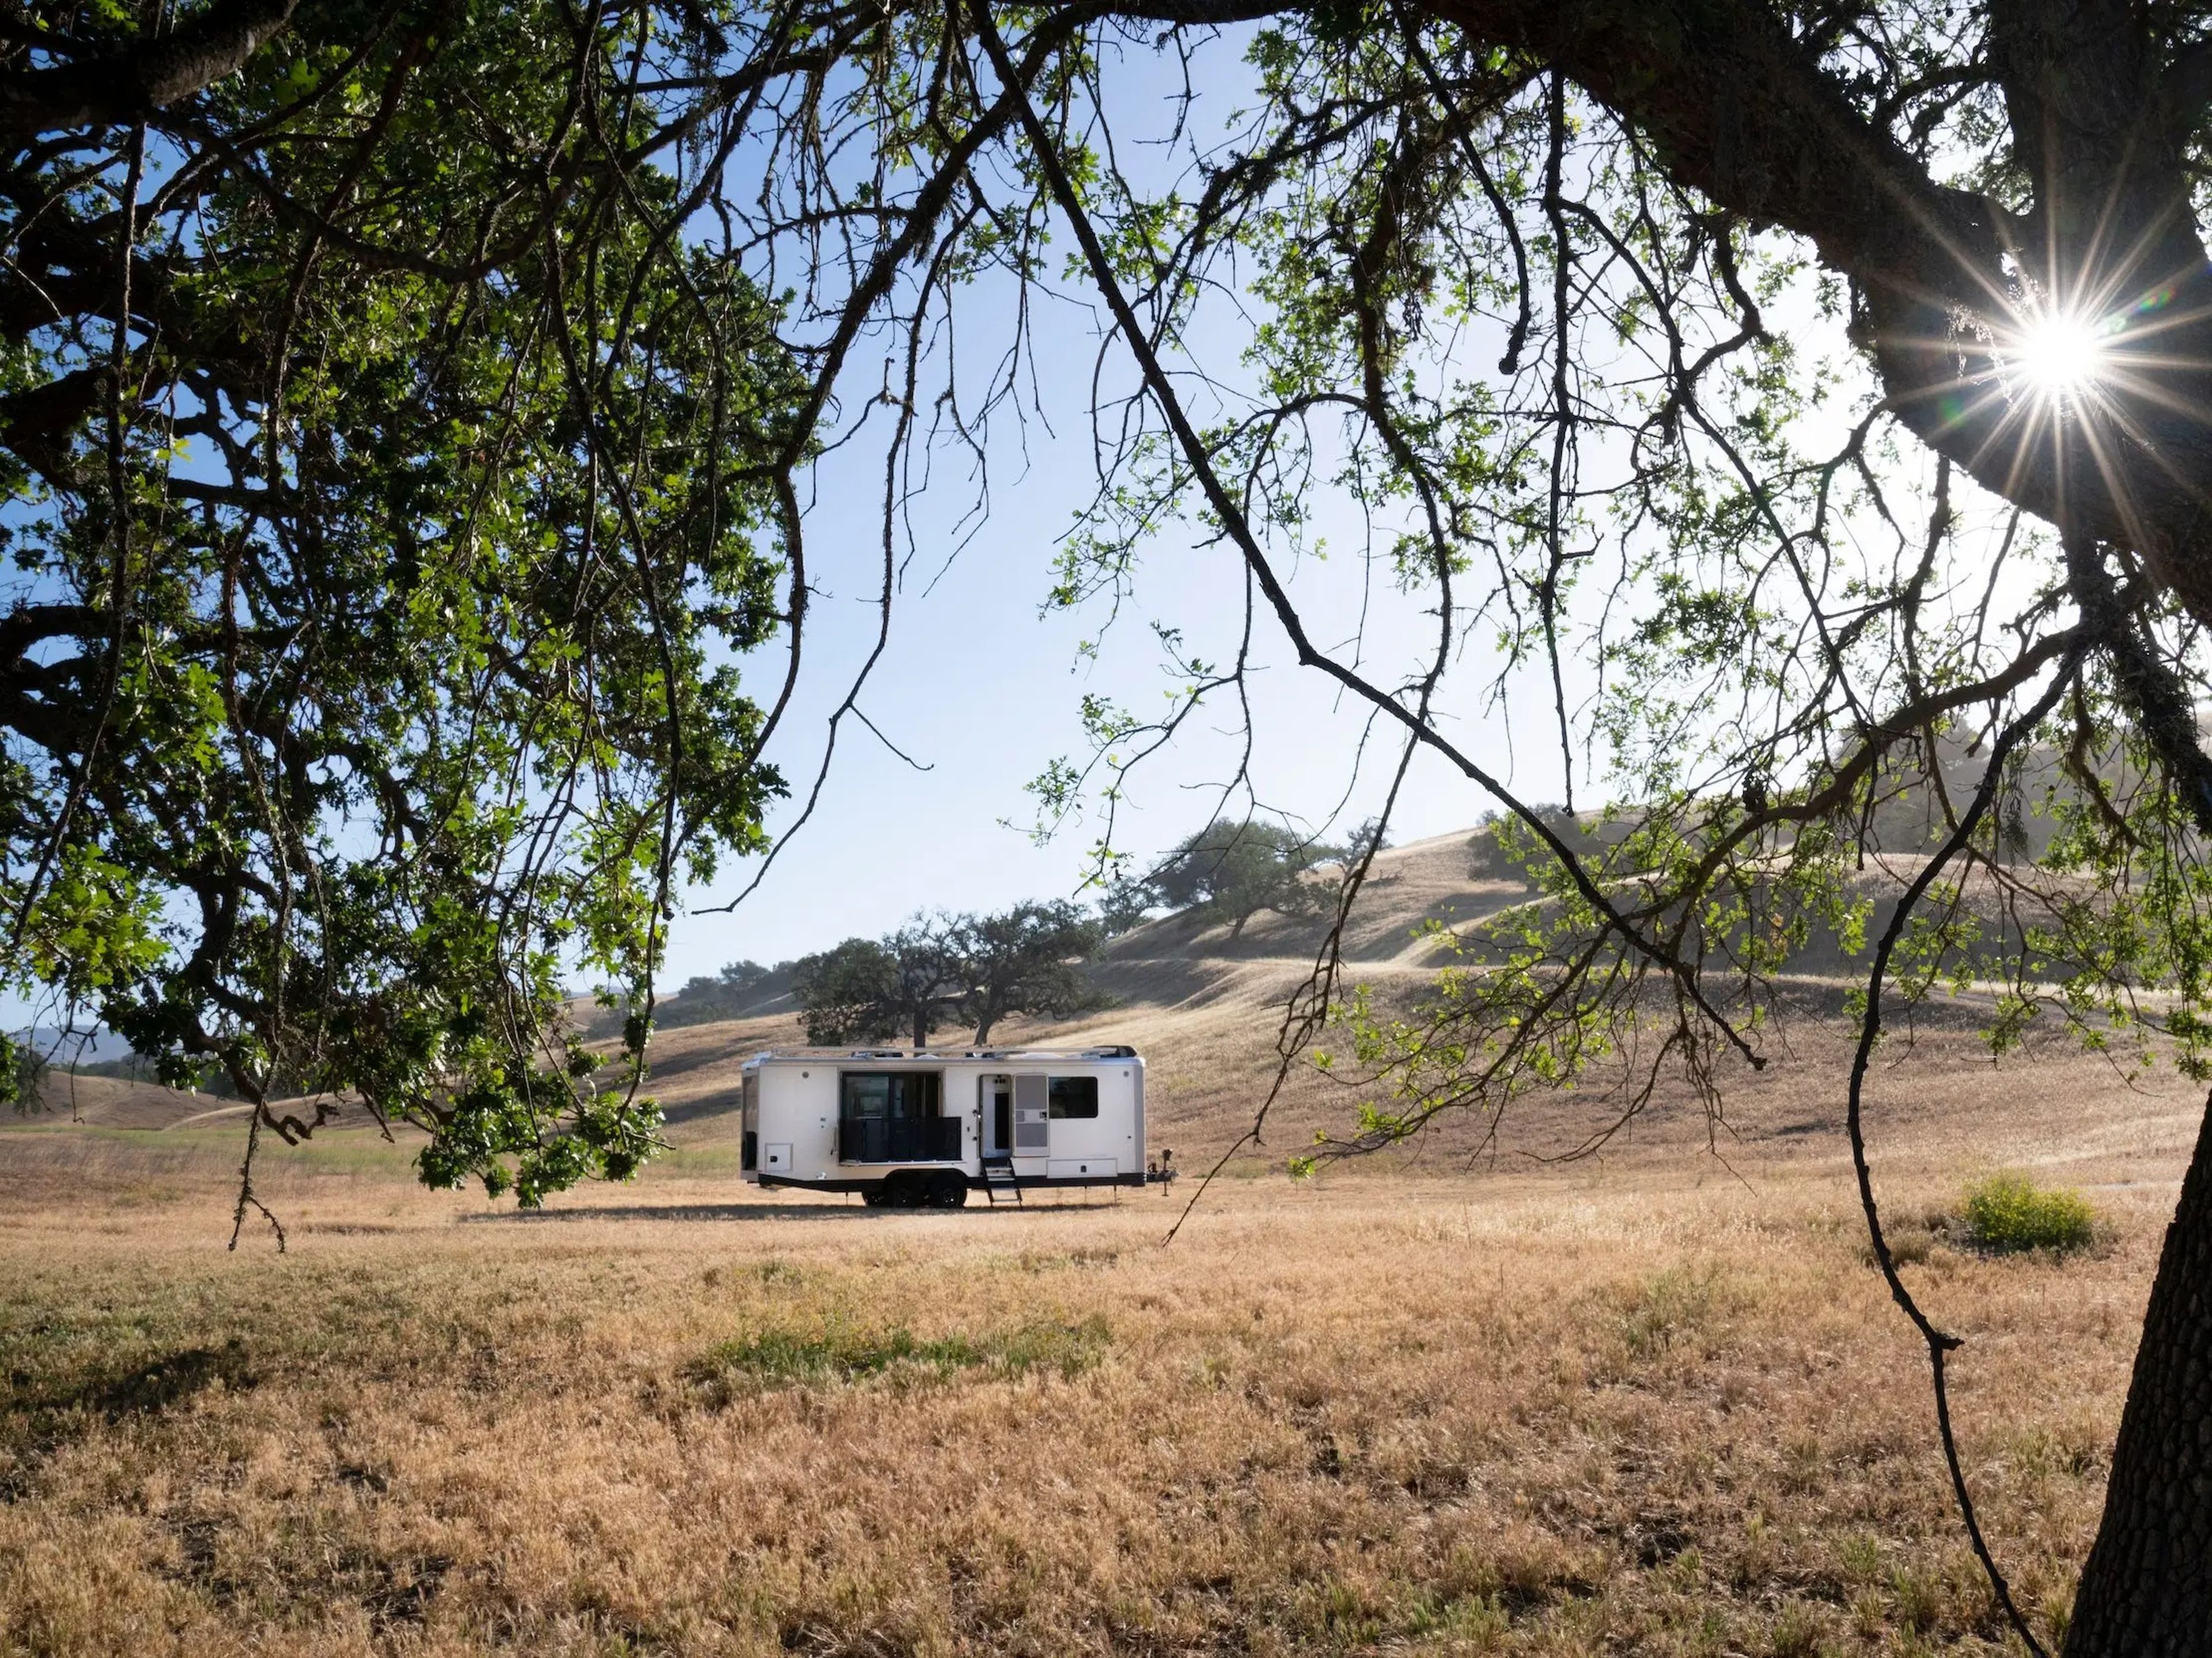 The exterior of the travel trailer as it sits on a brown field.